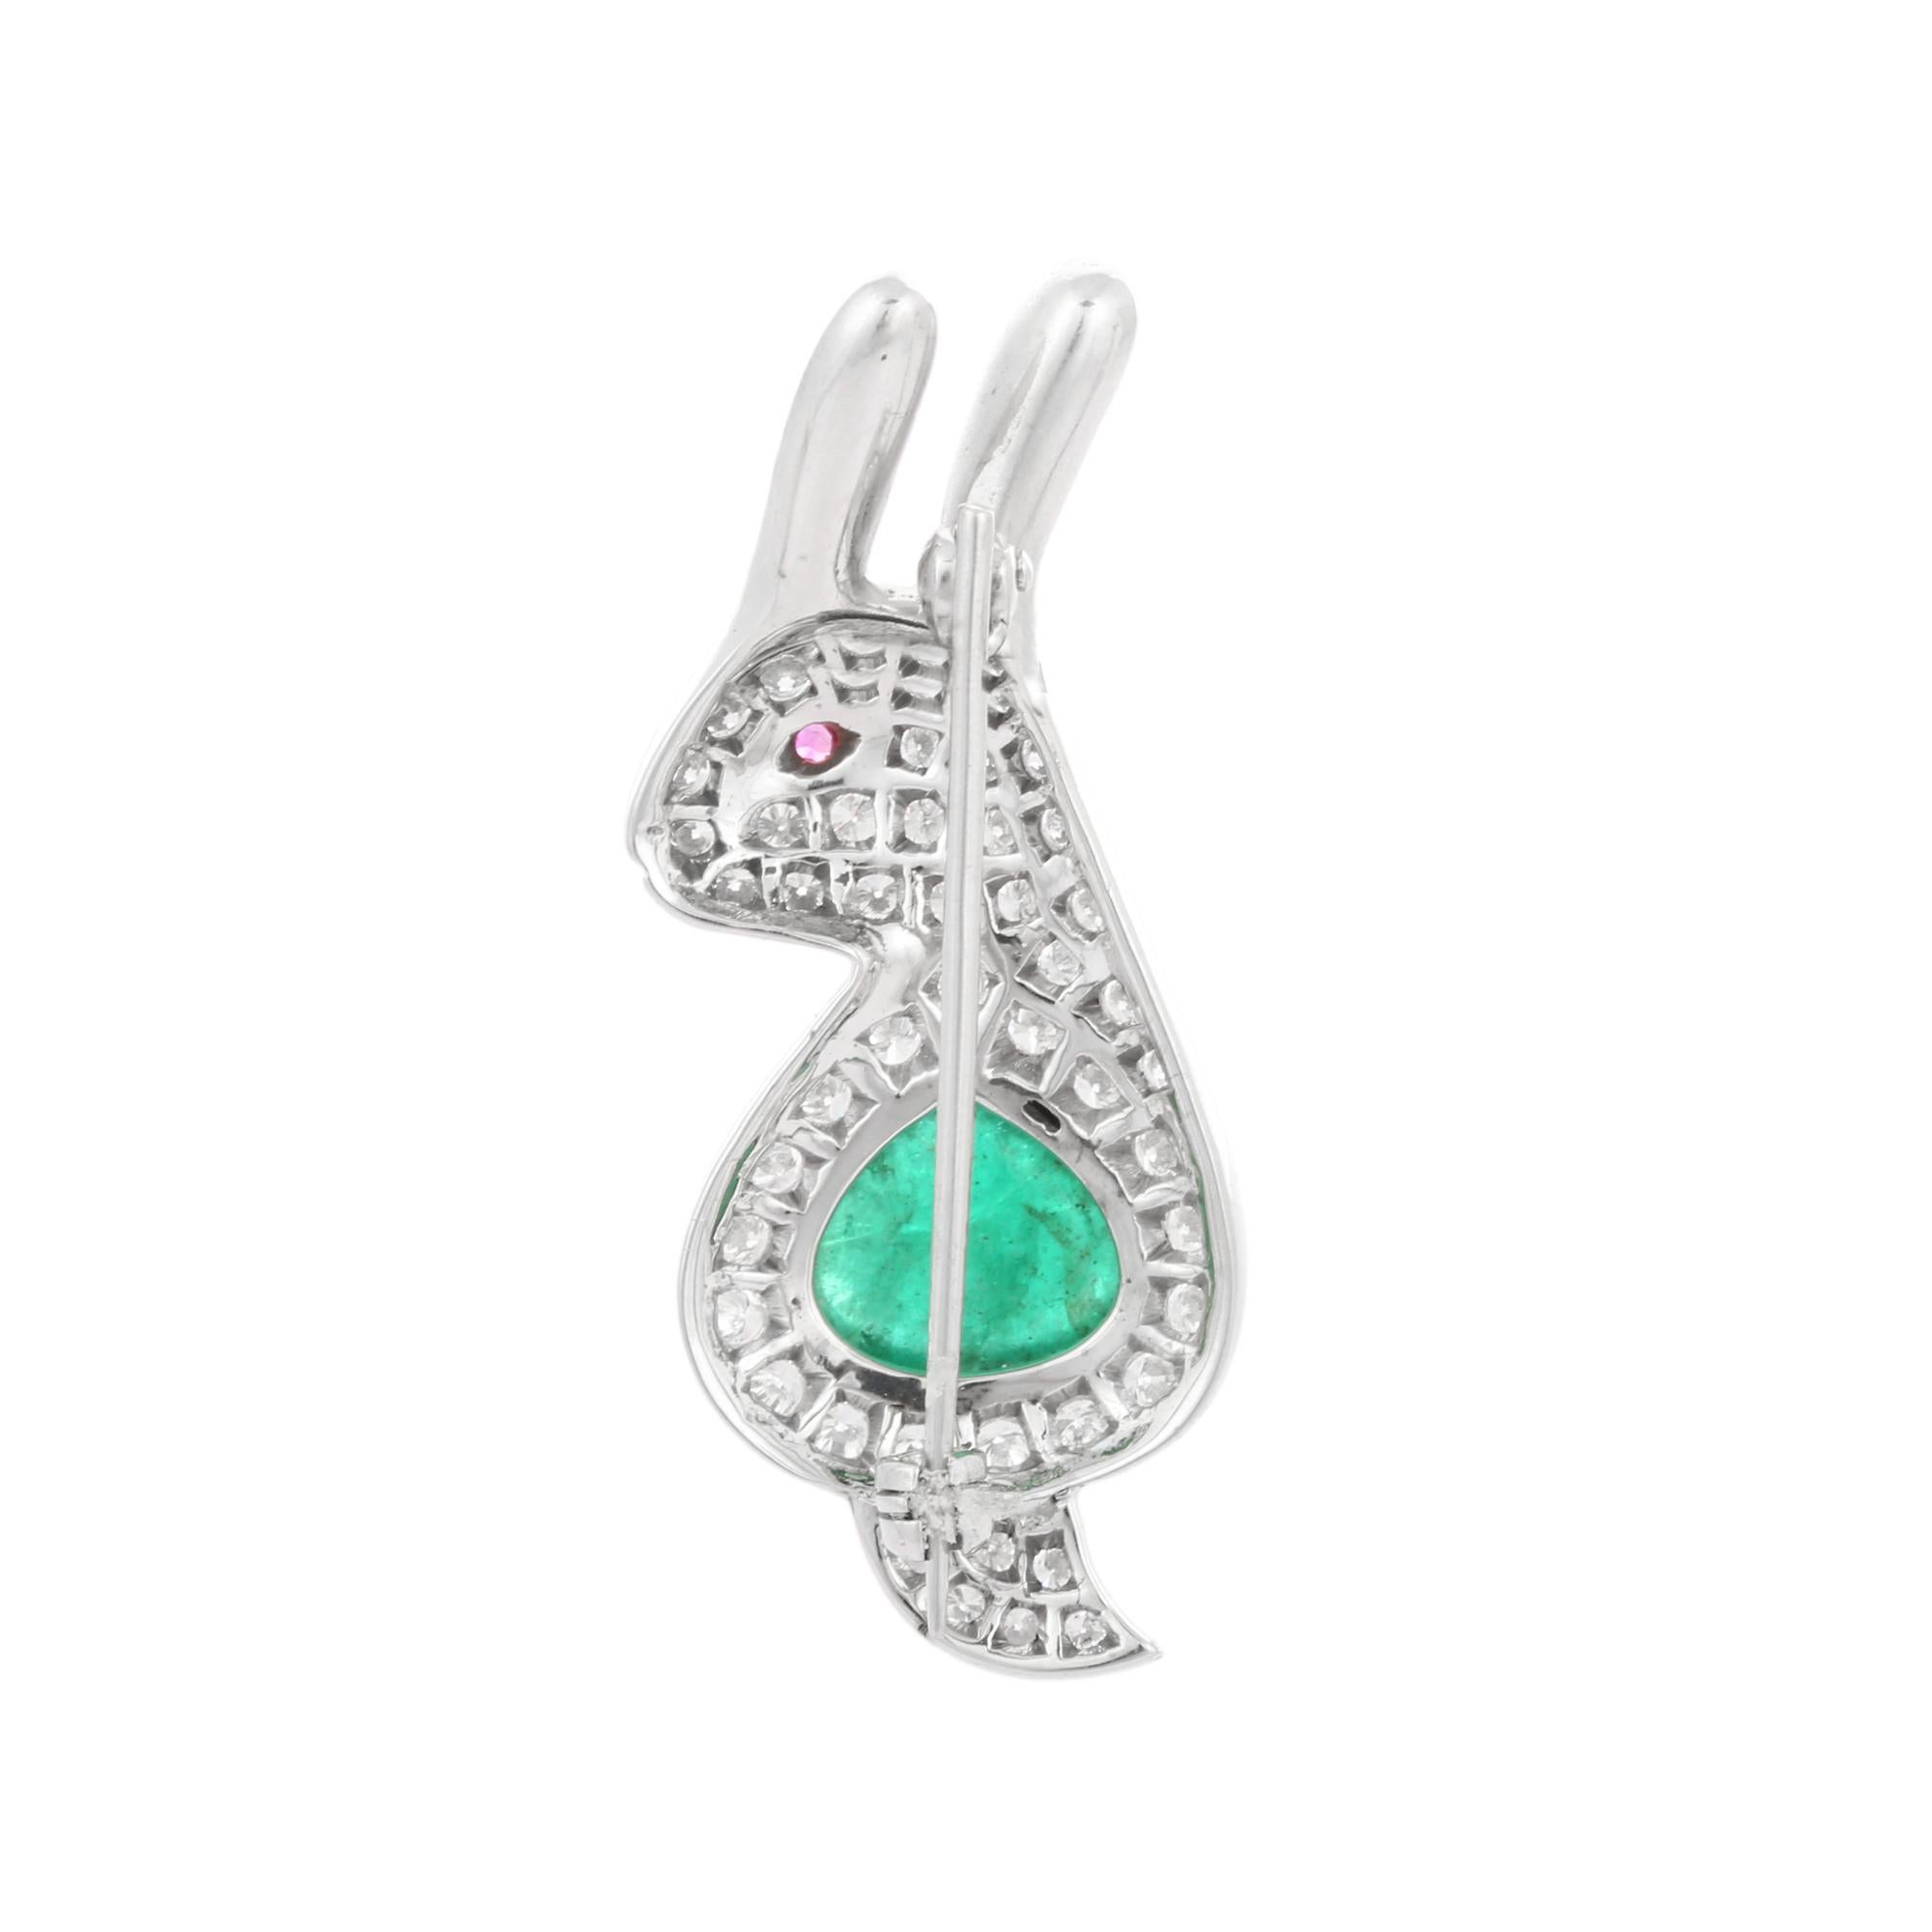 Artist 2.2 Carat Emerald Diamond Rabbit Brooch in 18k Solid White Gold, Unisex Gifts For Sale